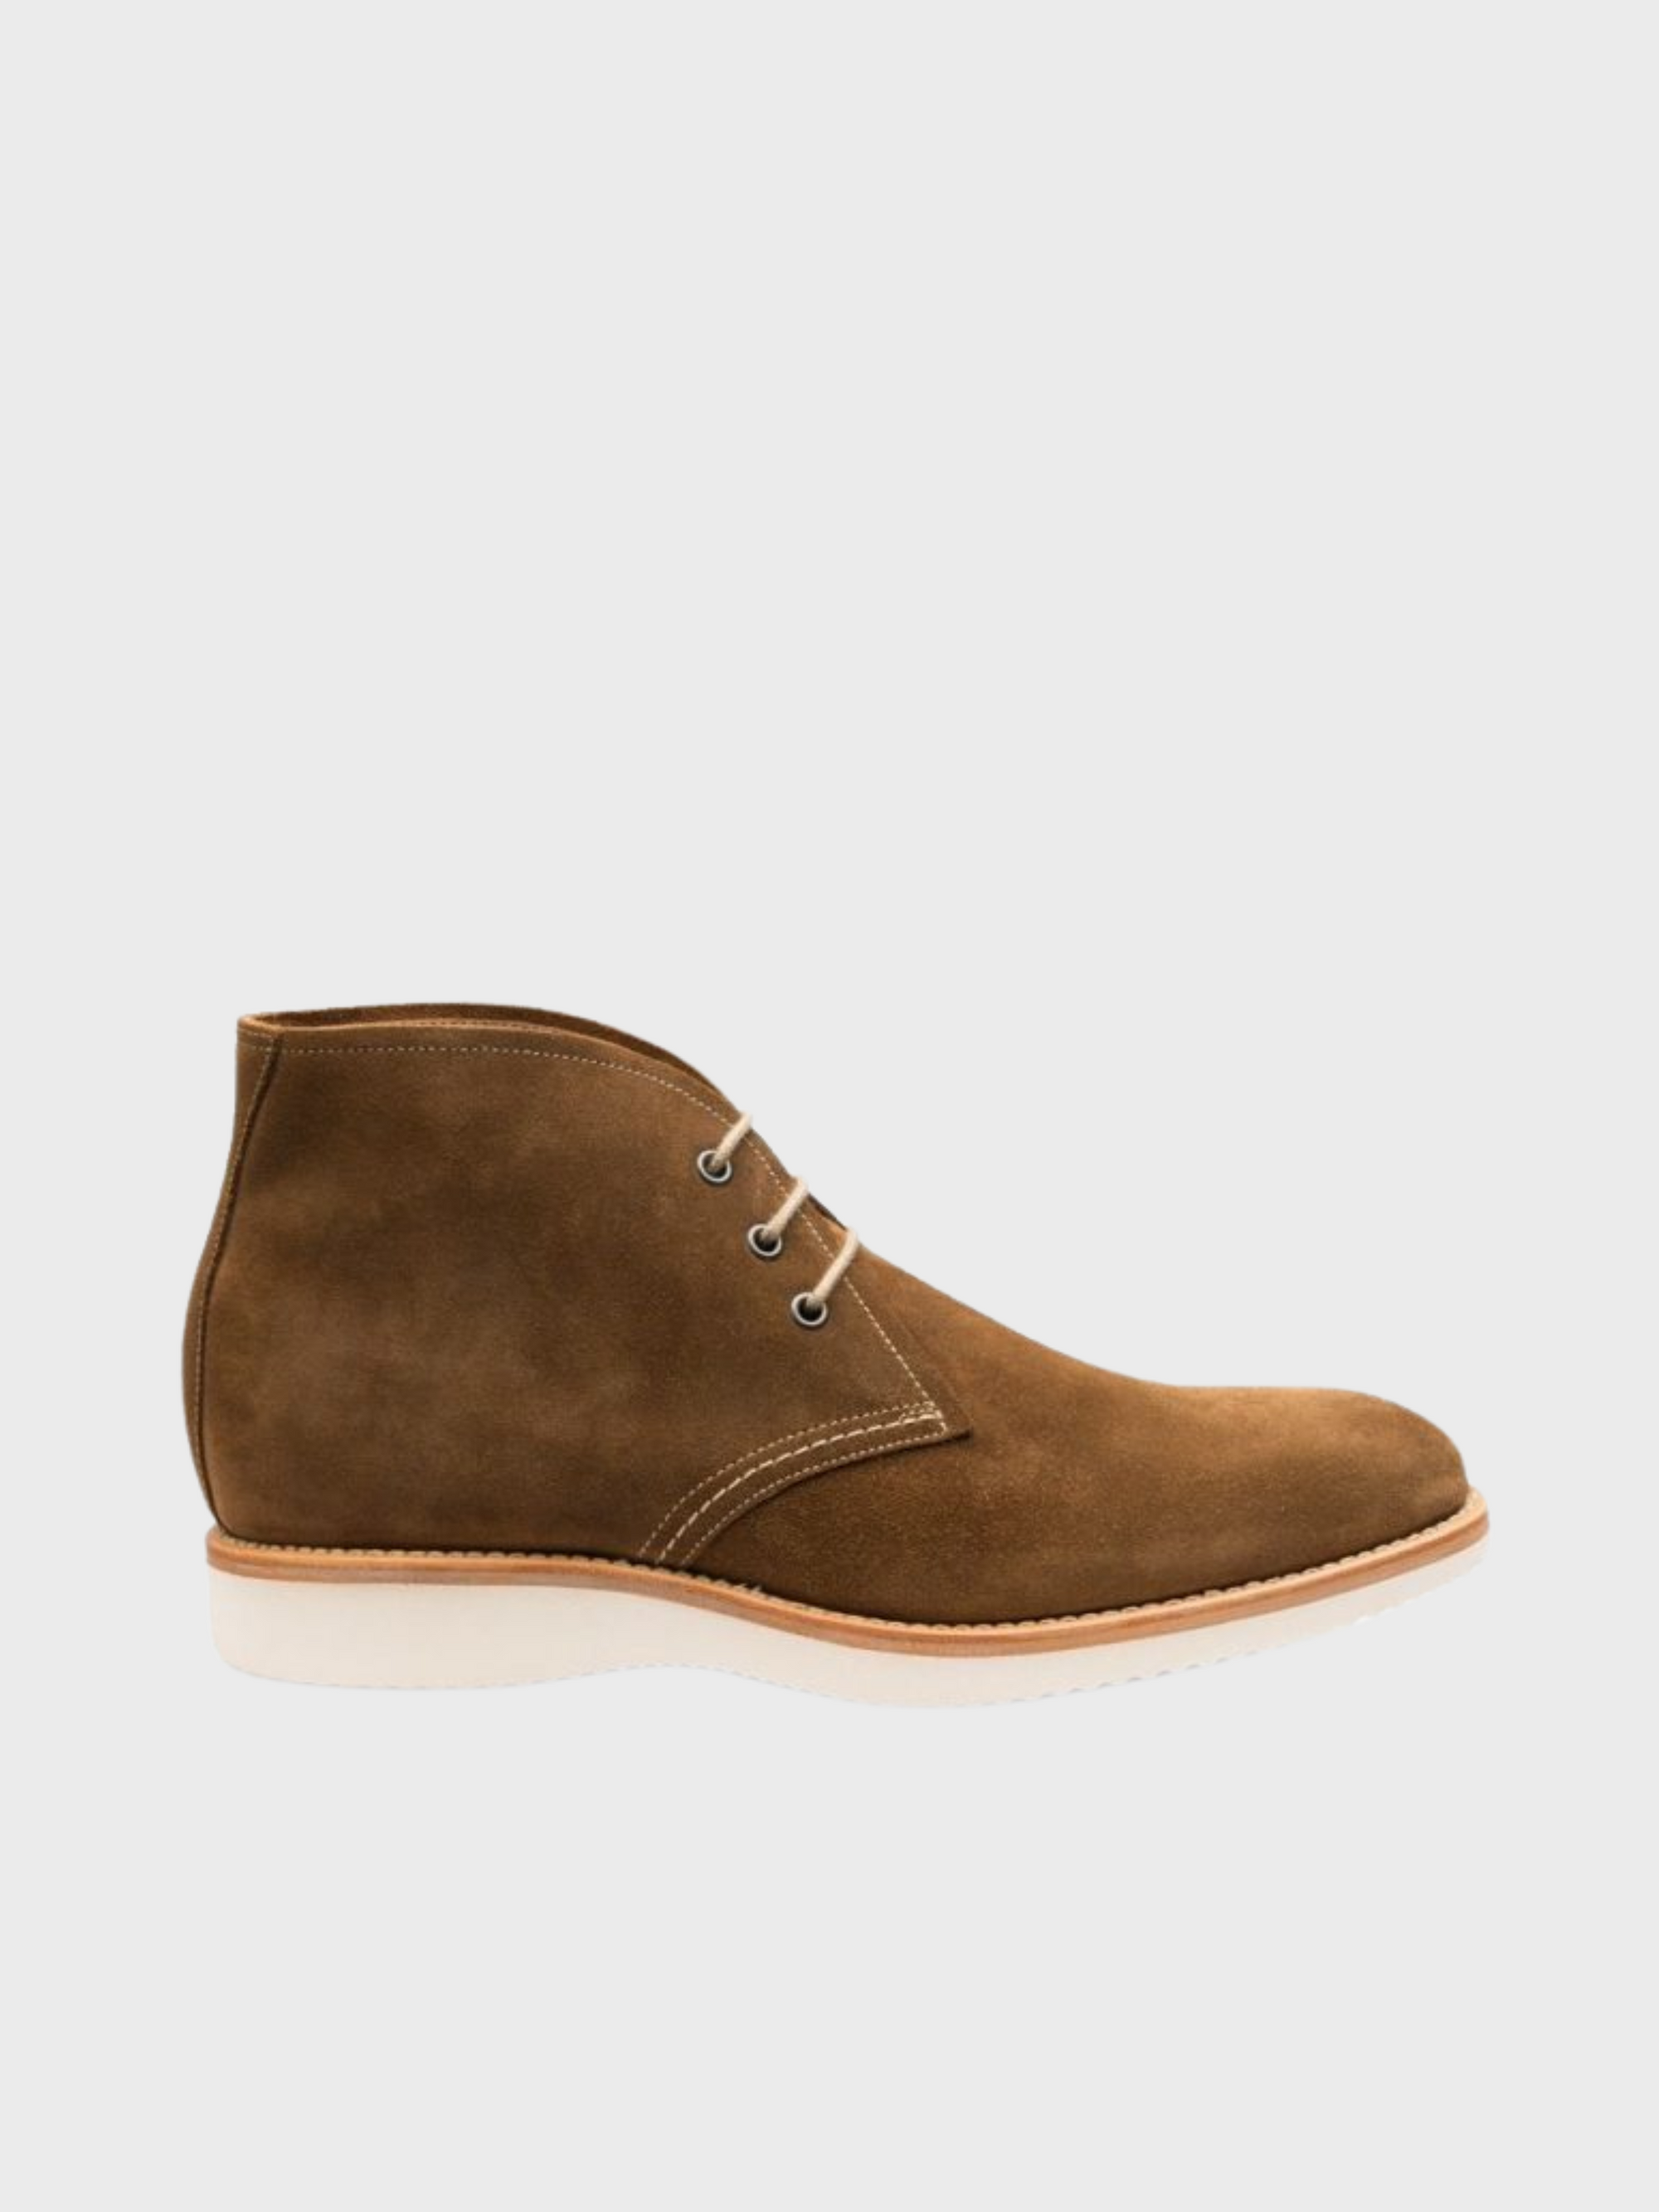 Loake - Chukka Boot- Python Tan Suede-Men&#39;s Shoes-40-Yaletown-Vancouver-Surrey-Canada